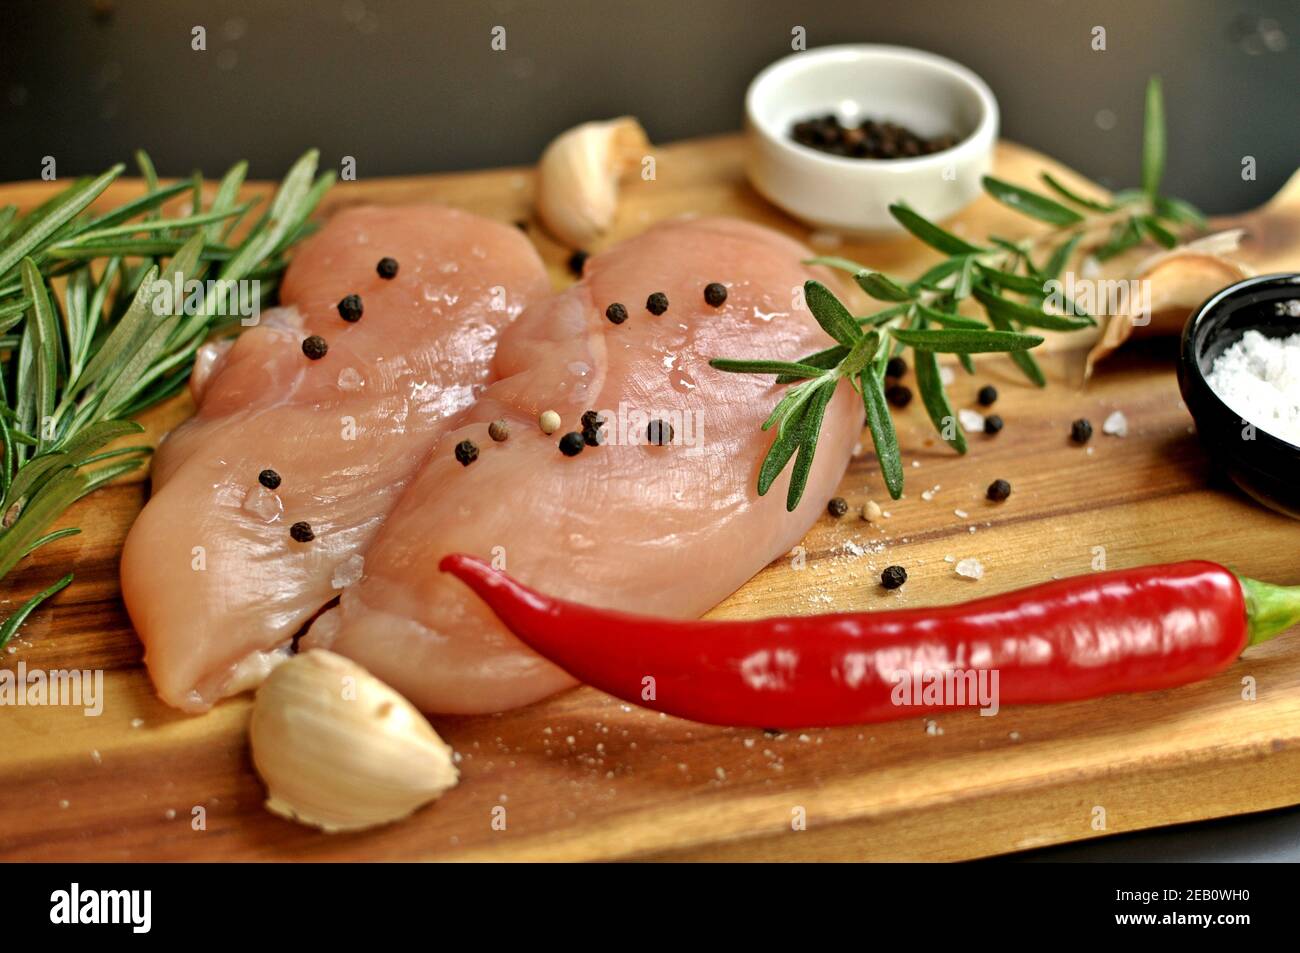 Raw fresh uncooked chicken breast meat fillet dish with rosemary, pepper, salt and red hot chili pepper on wooden board and black background. Stock Photo